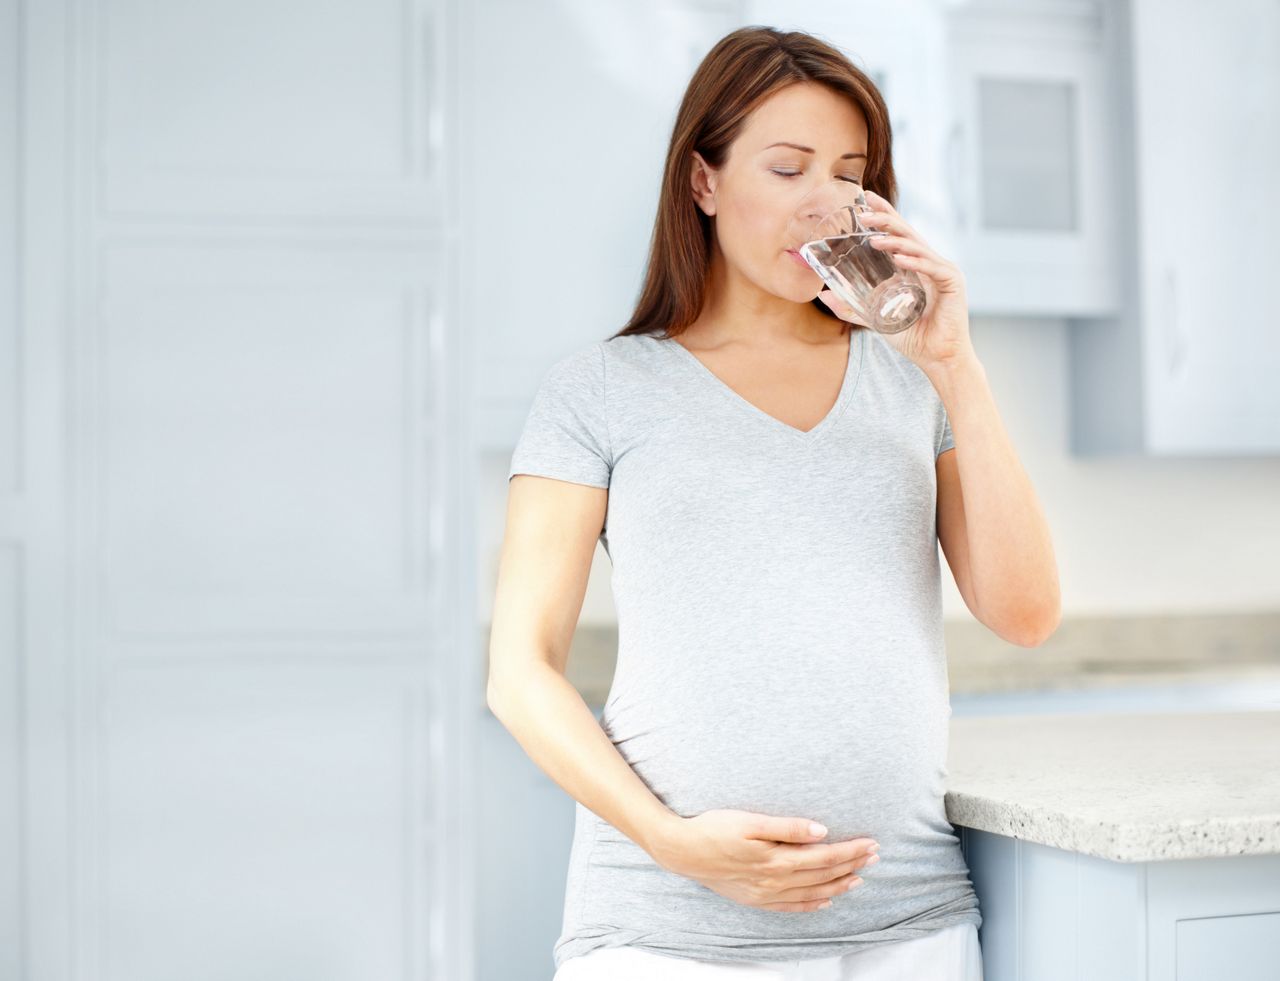 Young pregnant woman drinking a glass of water in her kitchen while holding her belly